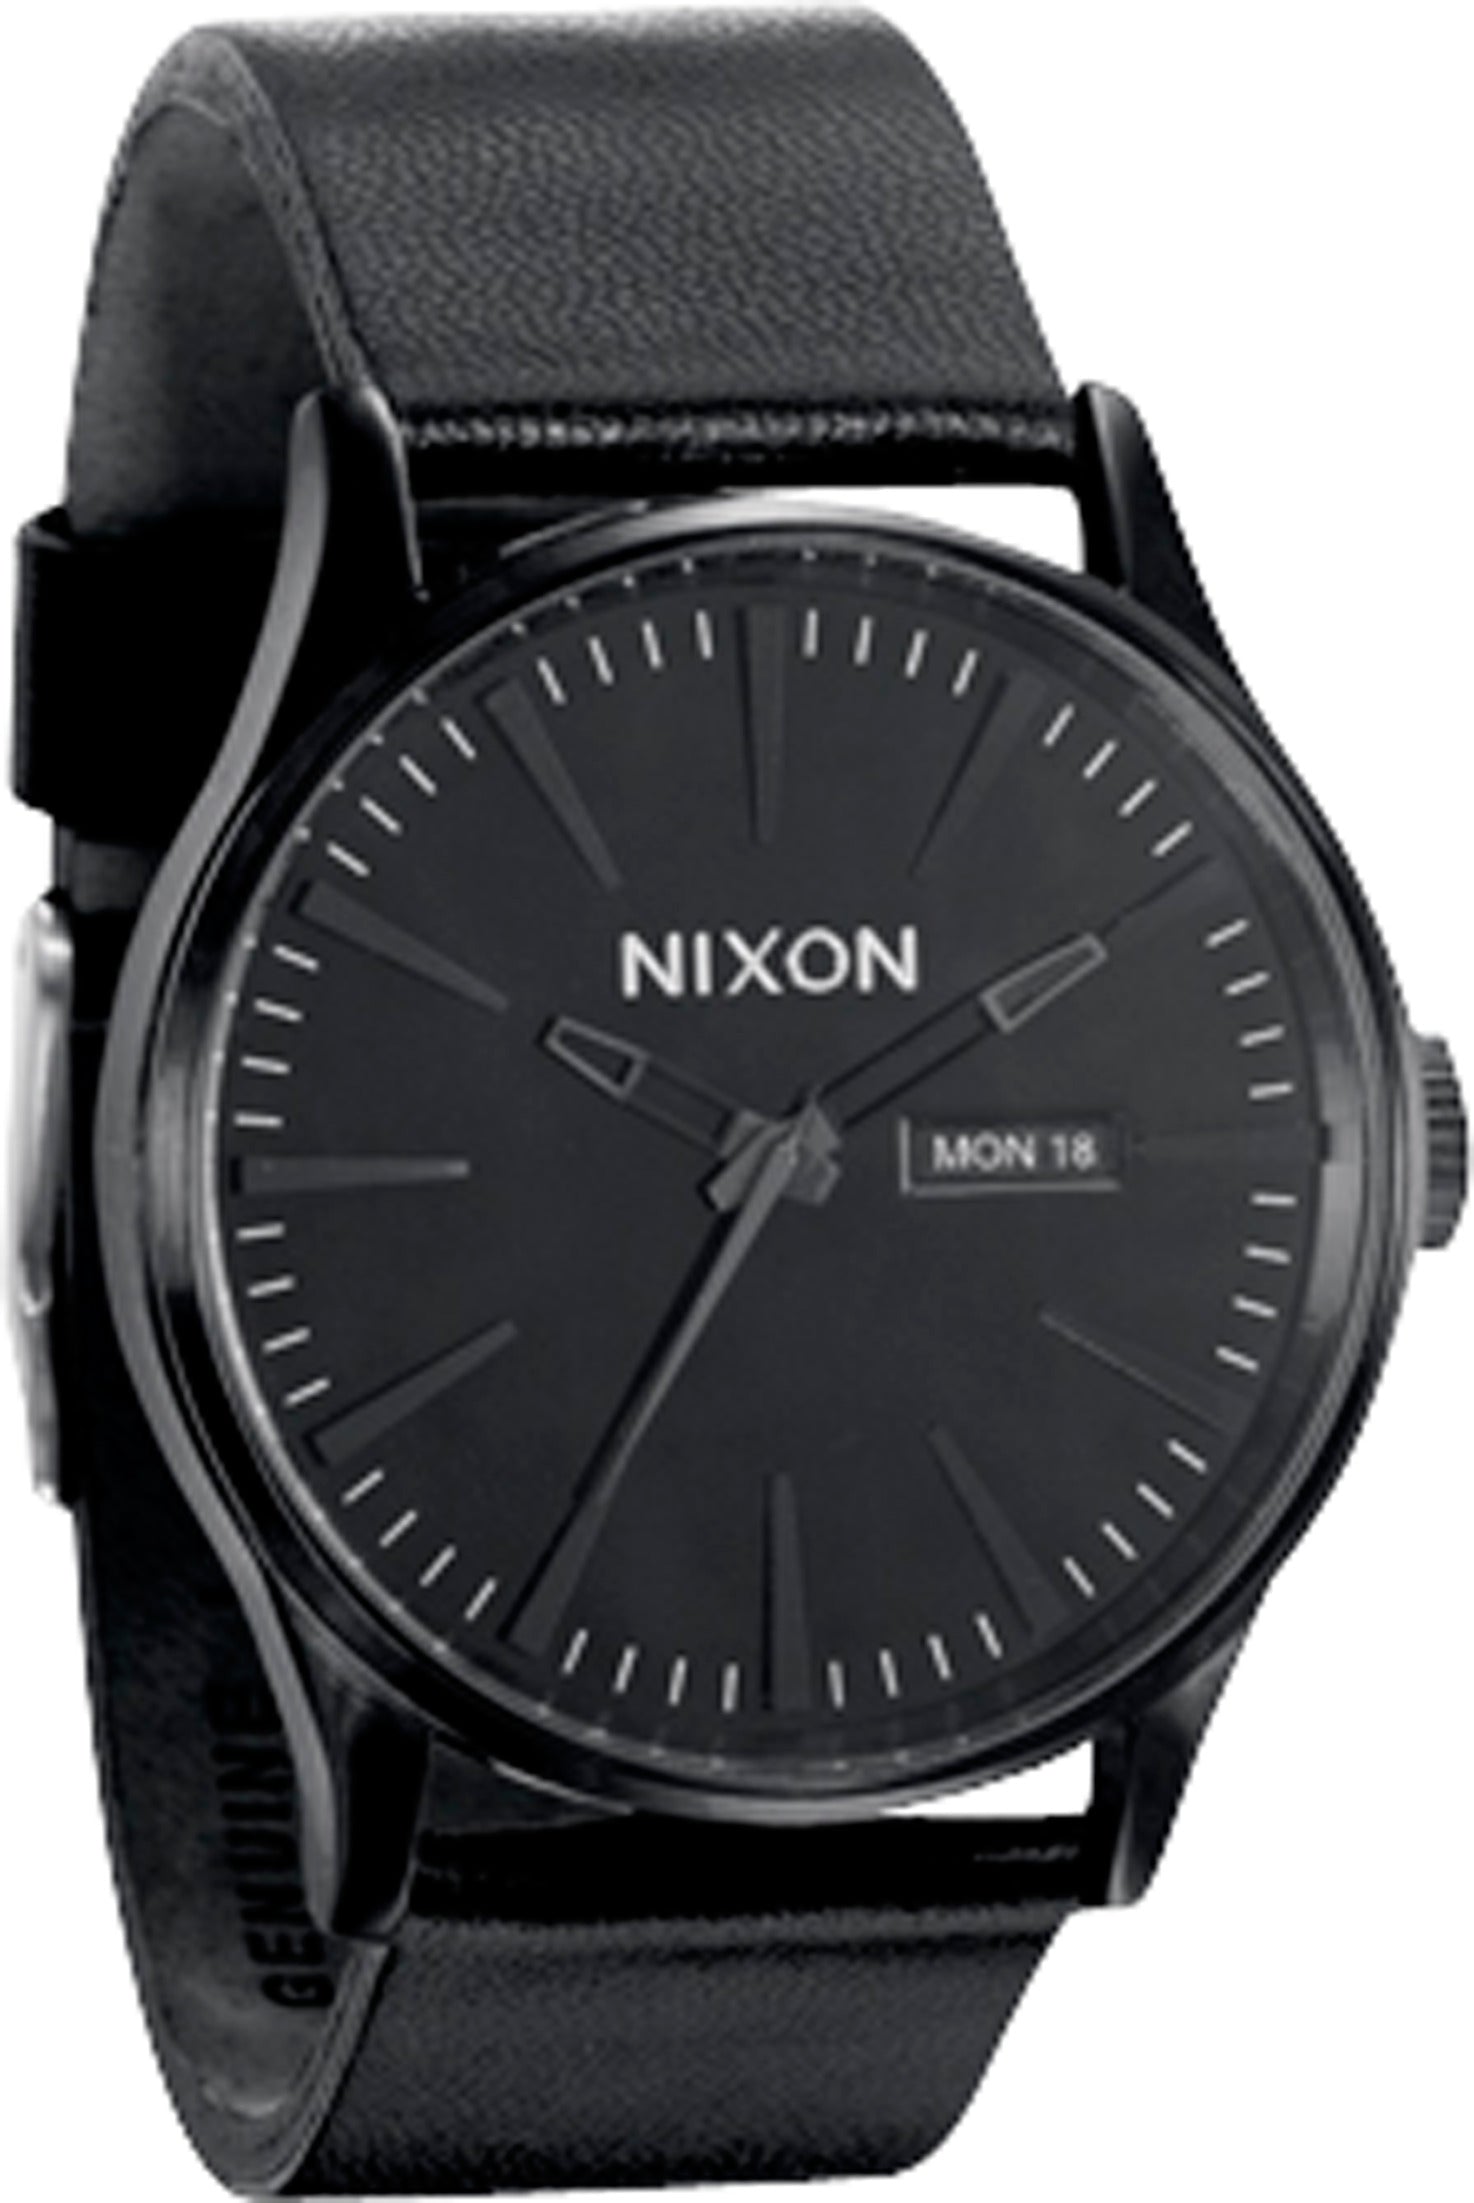 The Sentry Leather Nixon Watch in allblack for Women – TITUS